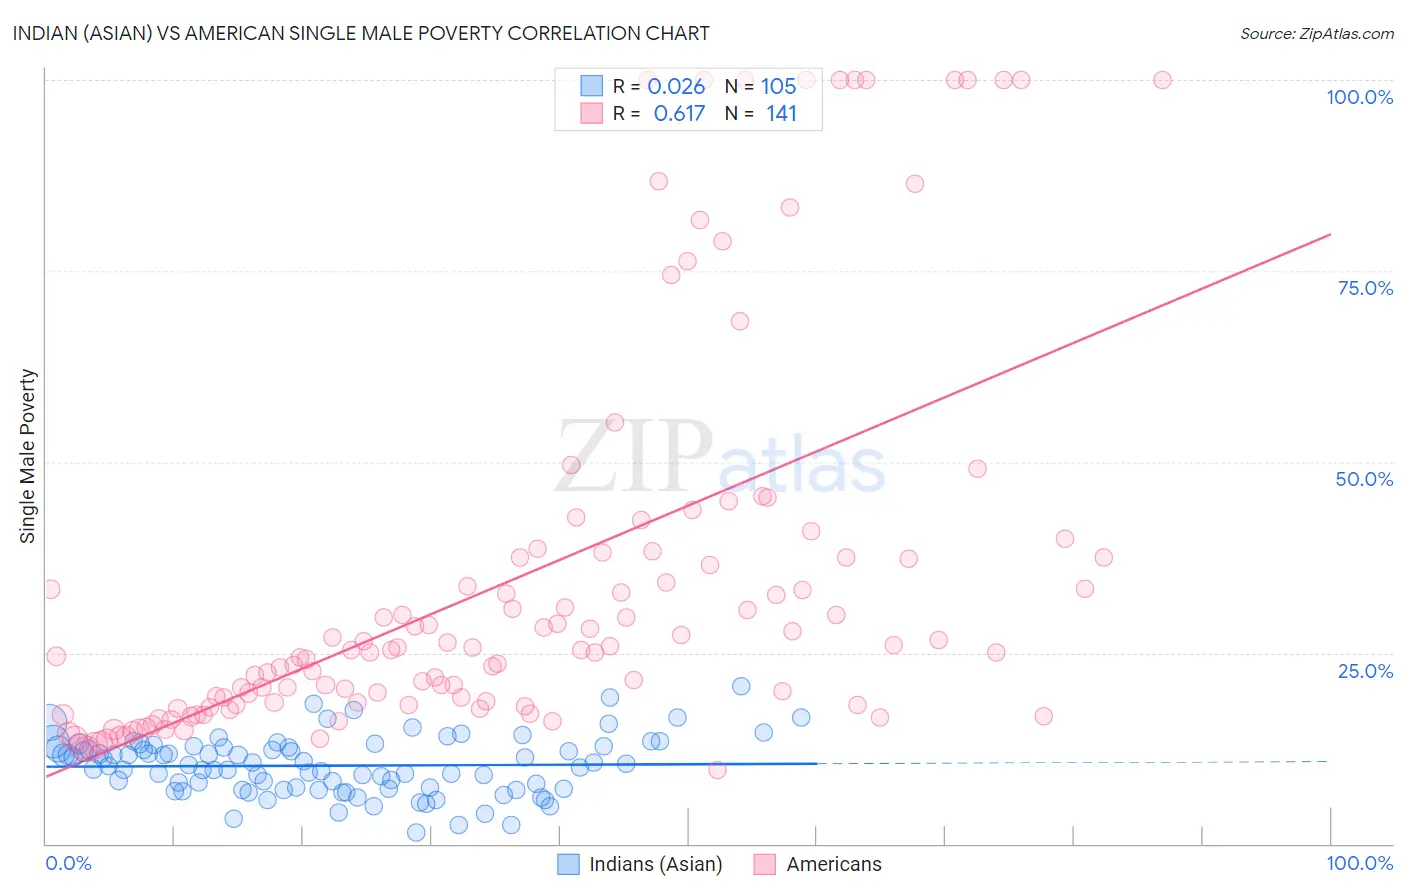 Indian (Asian) vs American Single Male Poverty